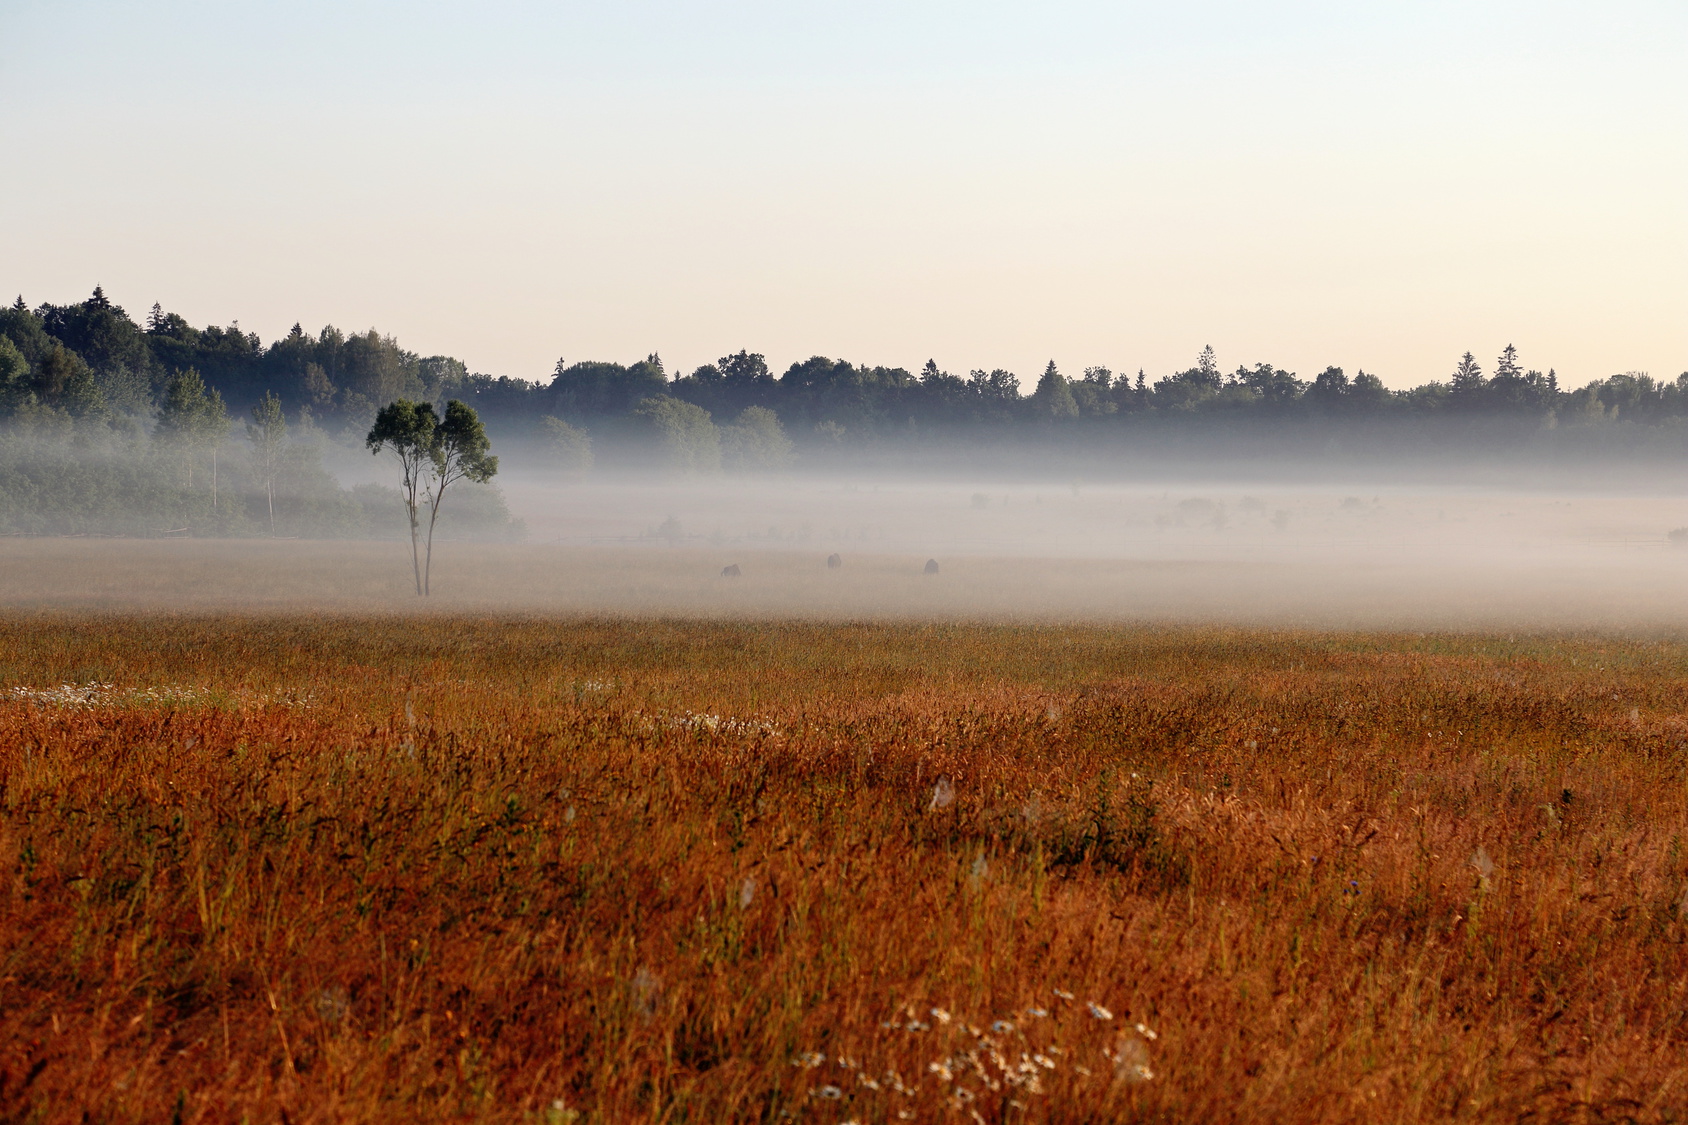 Foggy Sunrise over Grassy Meadow in Bialowieza National Park